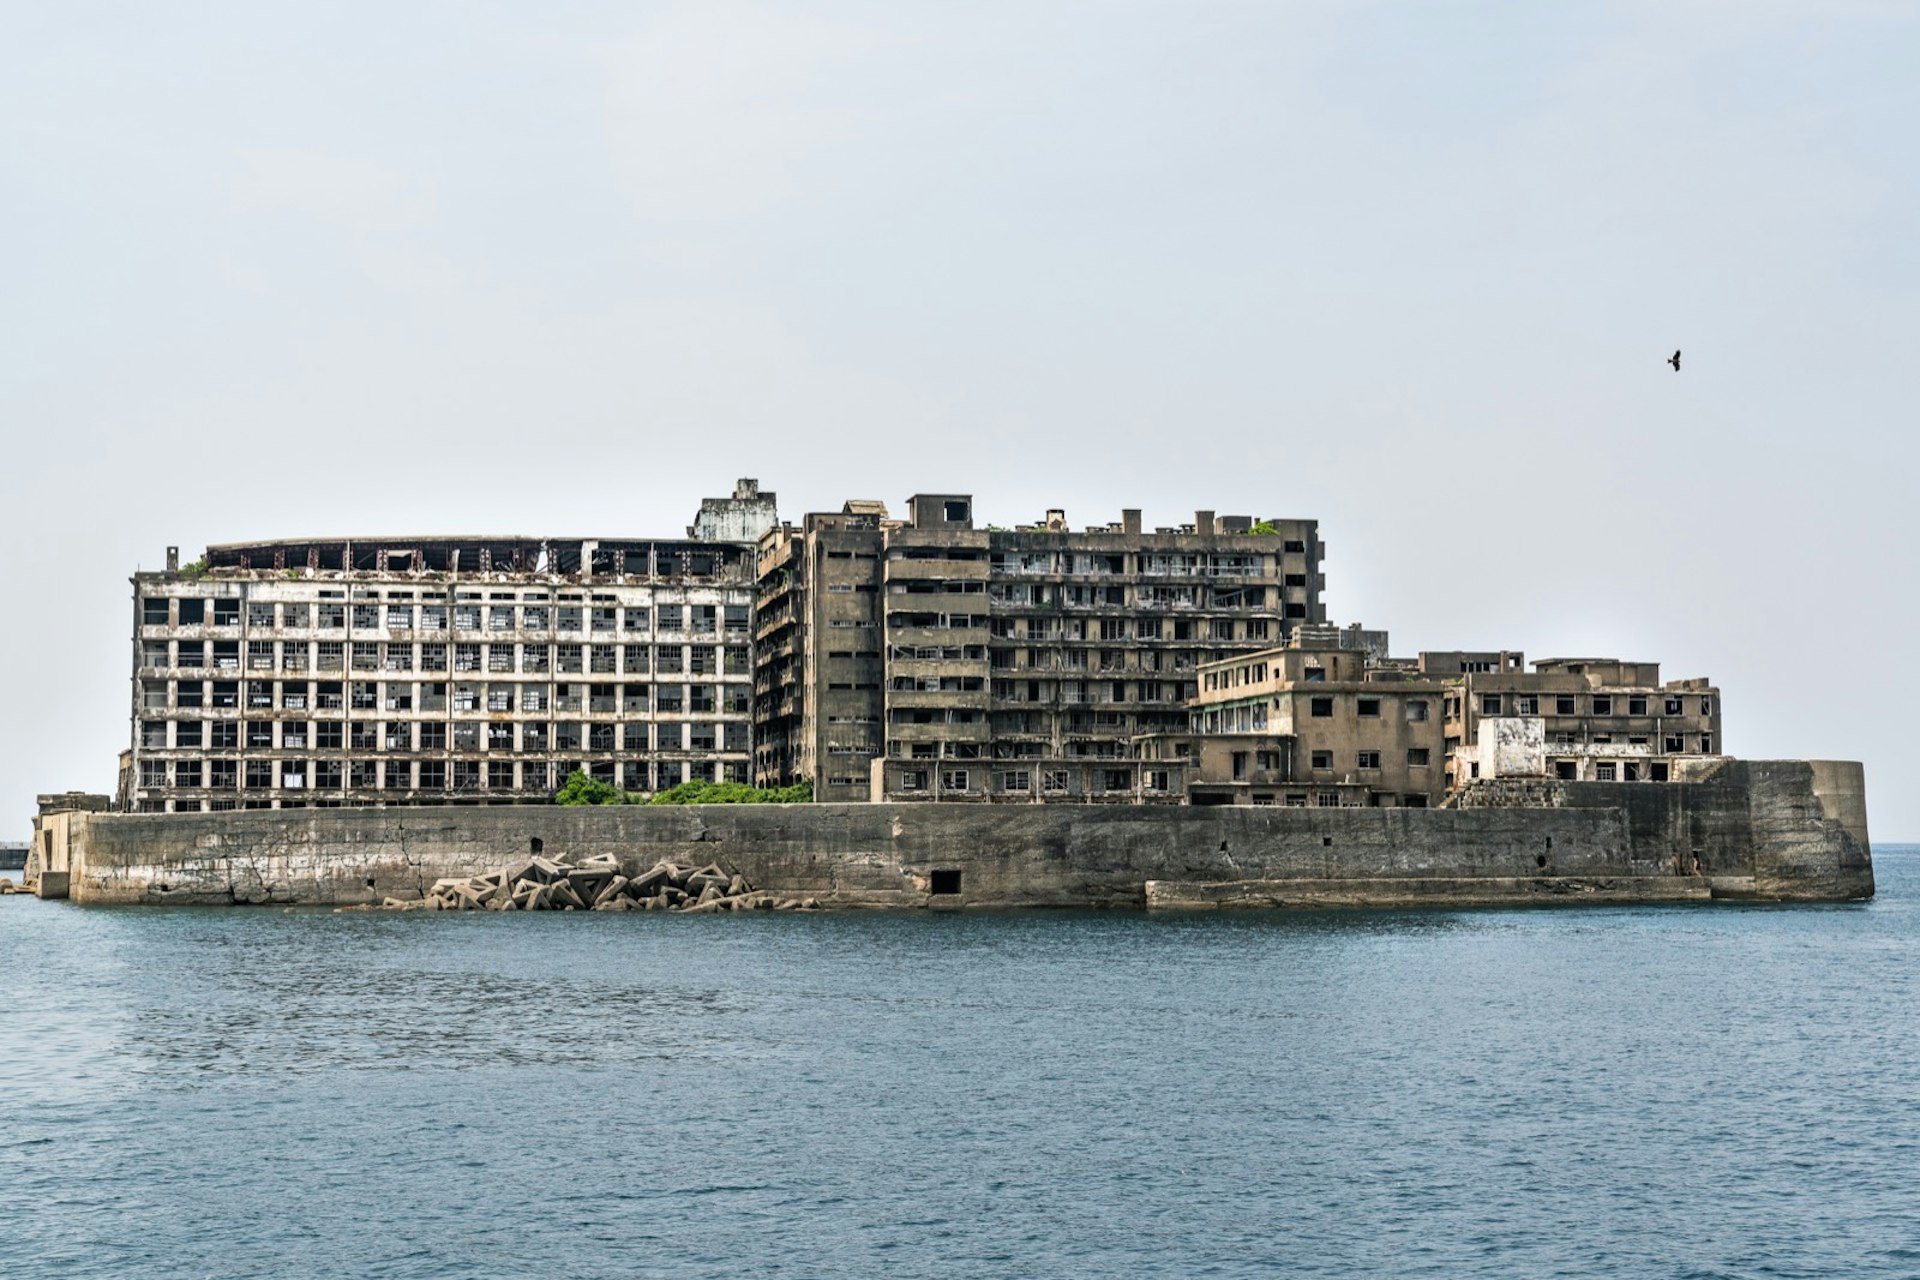 An abandoned island, with decaying buildings is seen in the middle of a calm bay © James Gabriel Martin / Lonely Planet